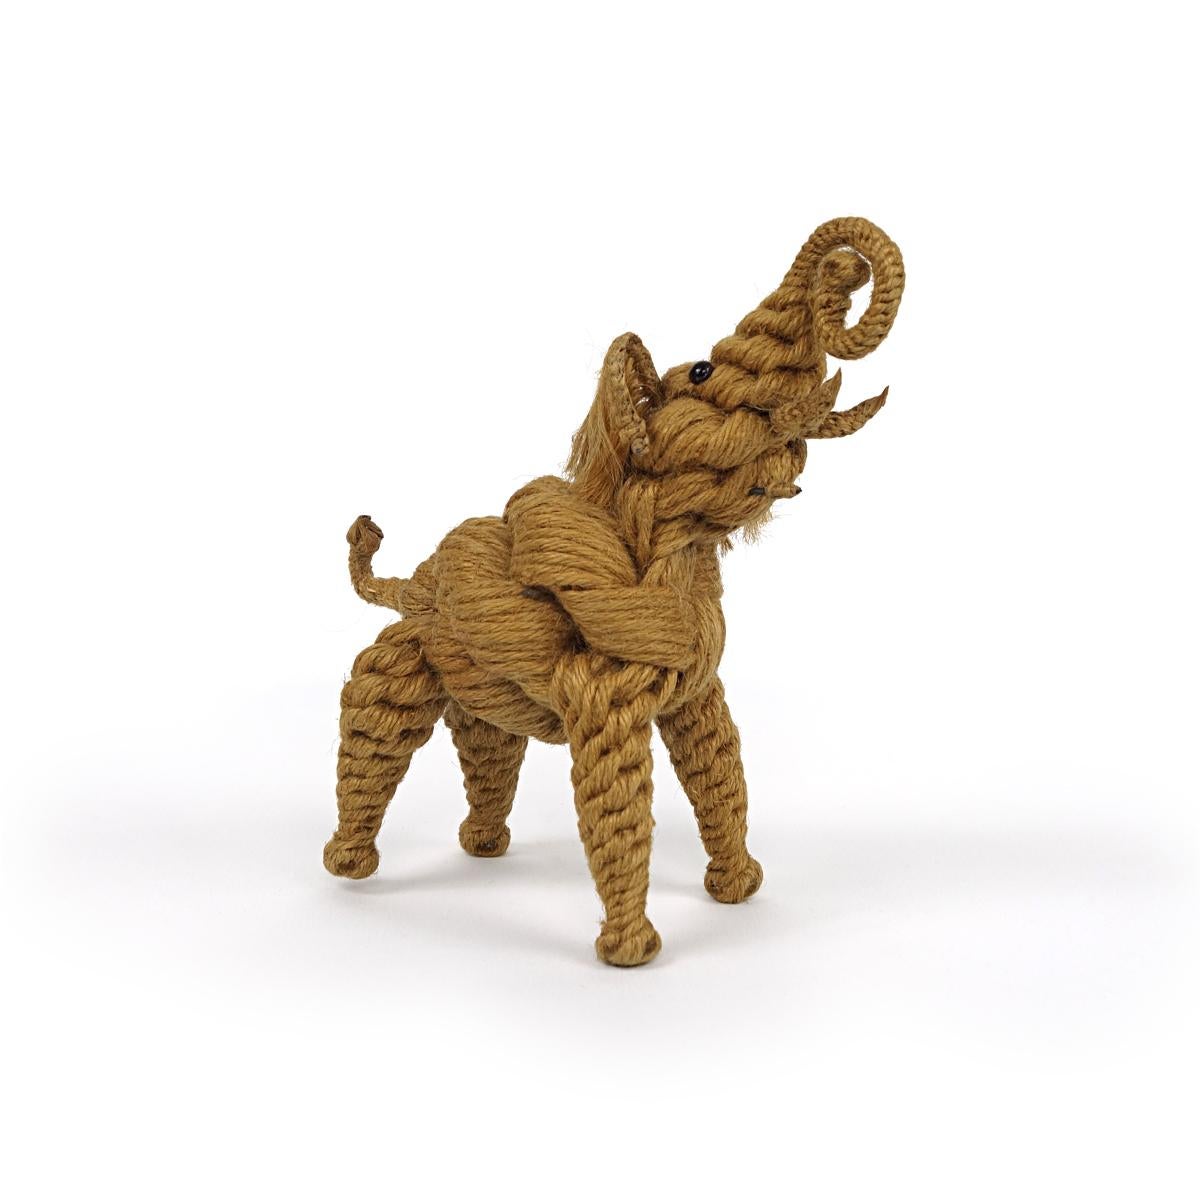 This adorable giant is powerfully knotted from coarse sisal rope. The position in which the tail and trunk of the elephant stand depends on the mood of its owner...
Iron wire in the core provides a cheerful flexibility in the form and shape.
The